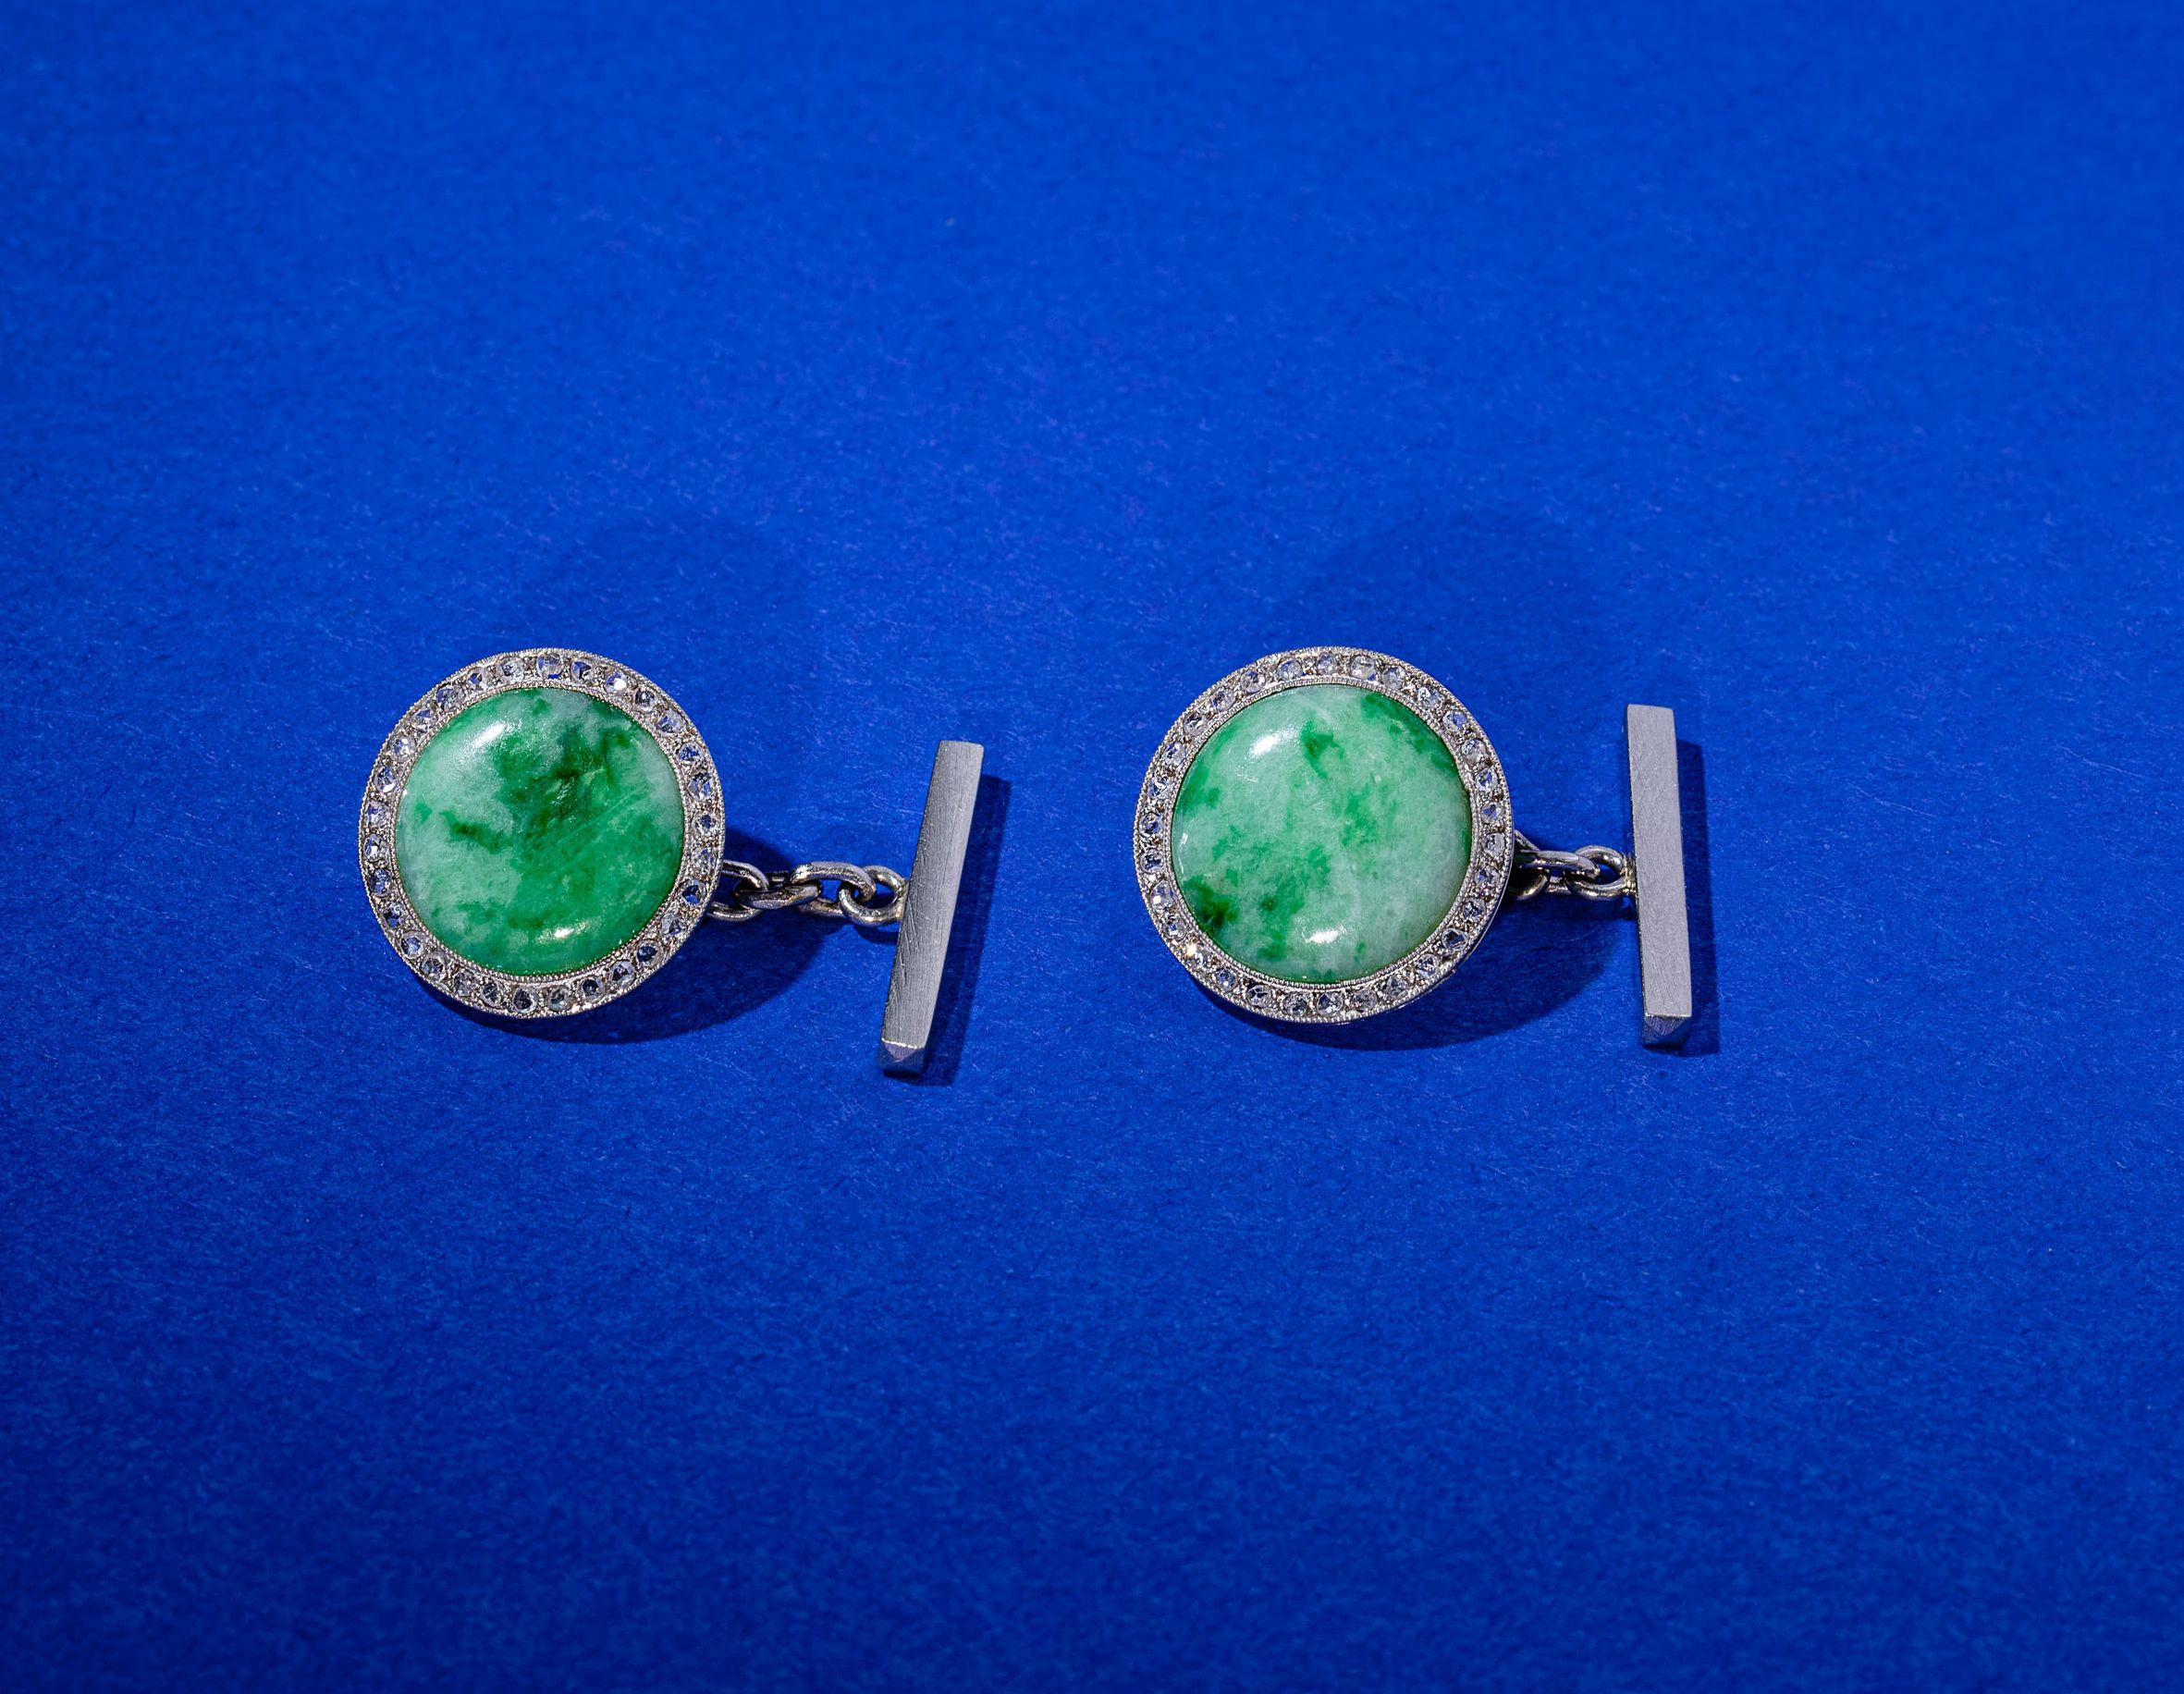 Gorgeous cufflinks made of Platinum with jade cabochons framed by rose-cut diamonds.
Early 20th century, French assay marks and maker's mark.